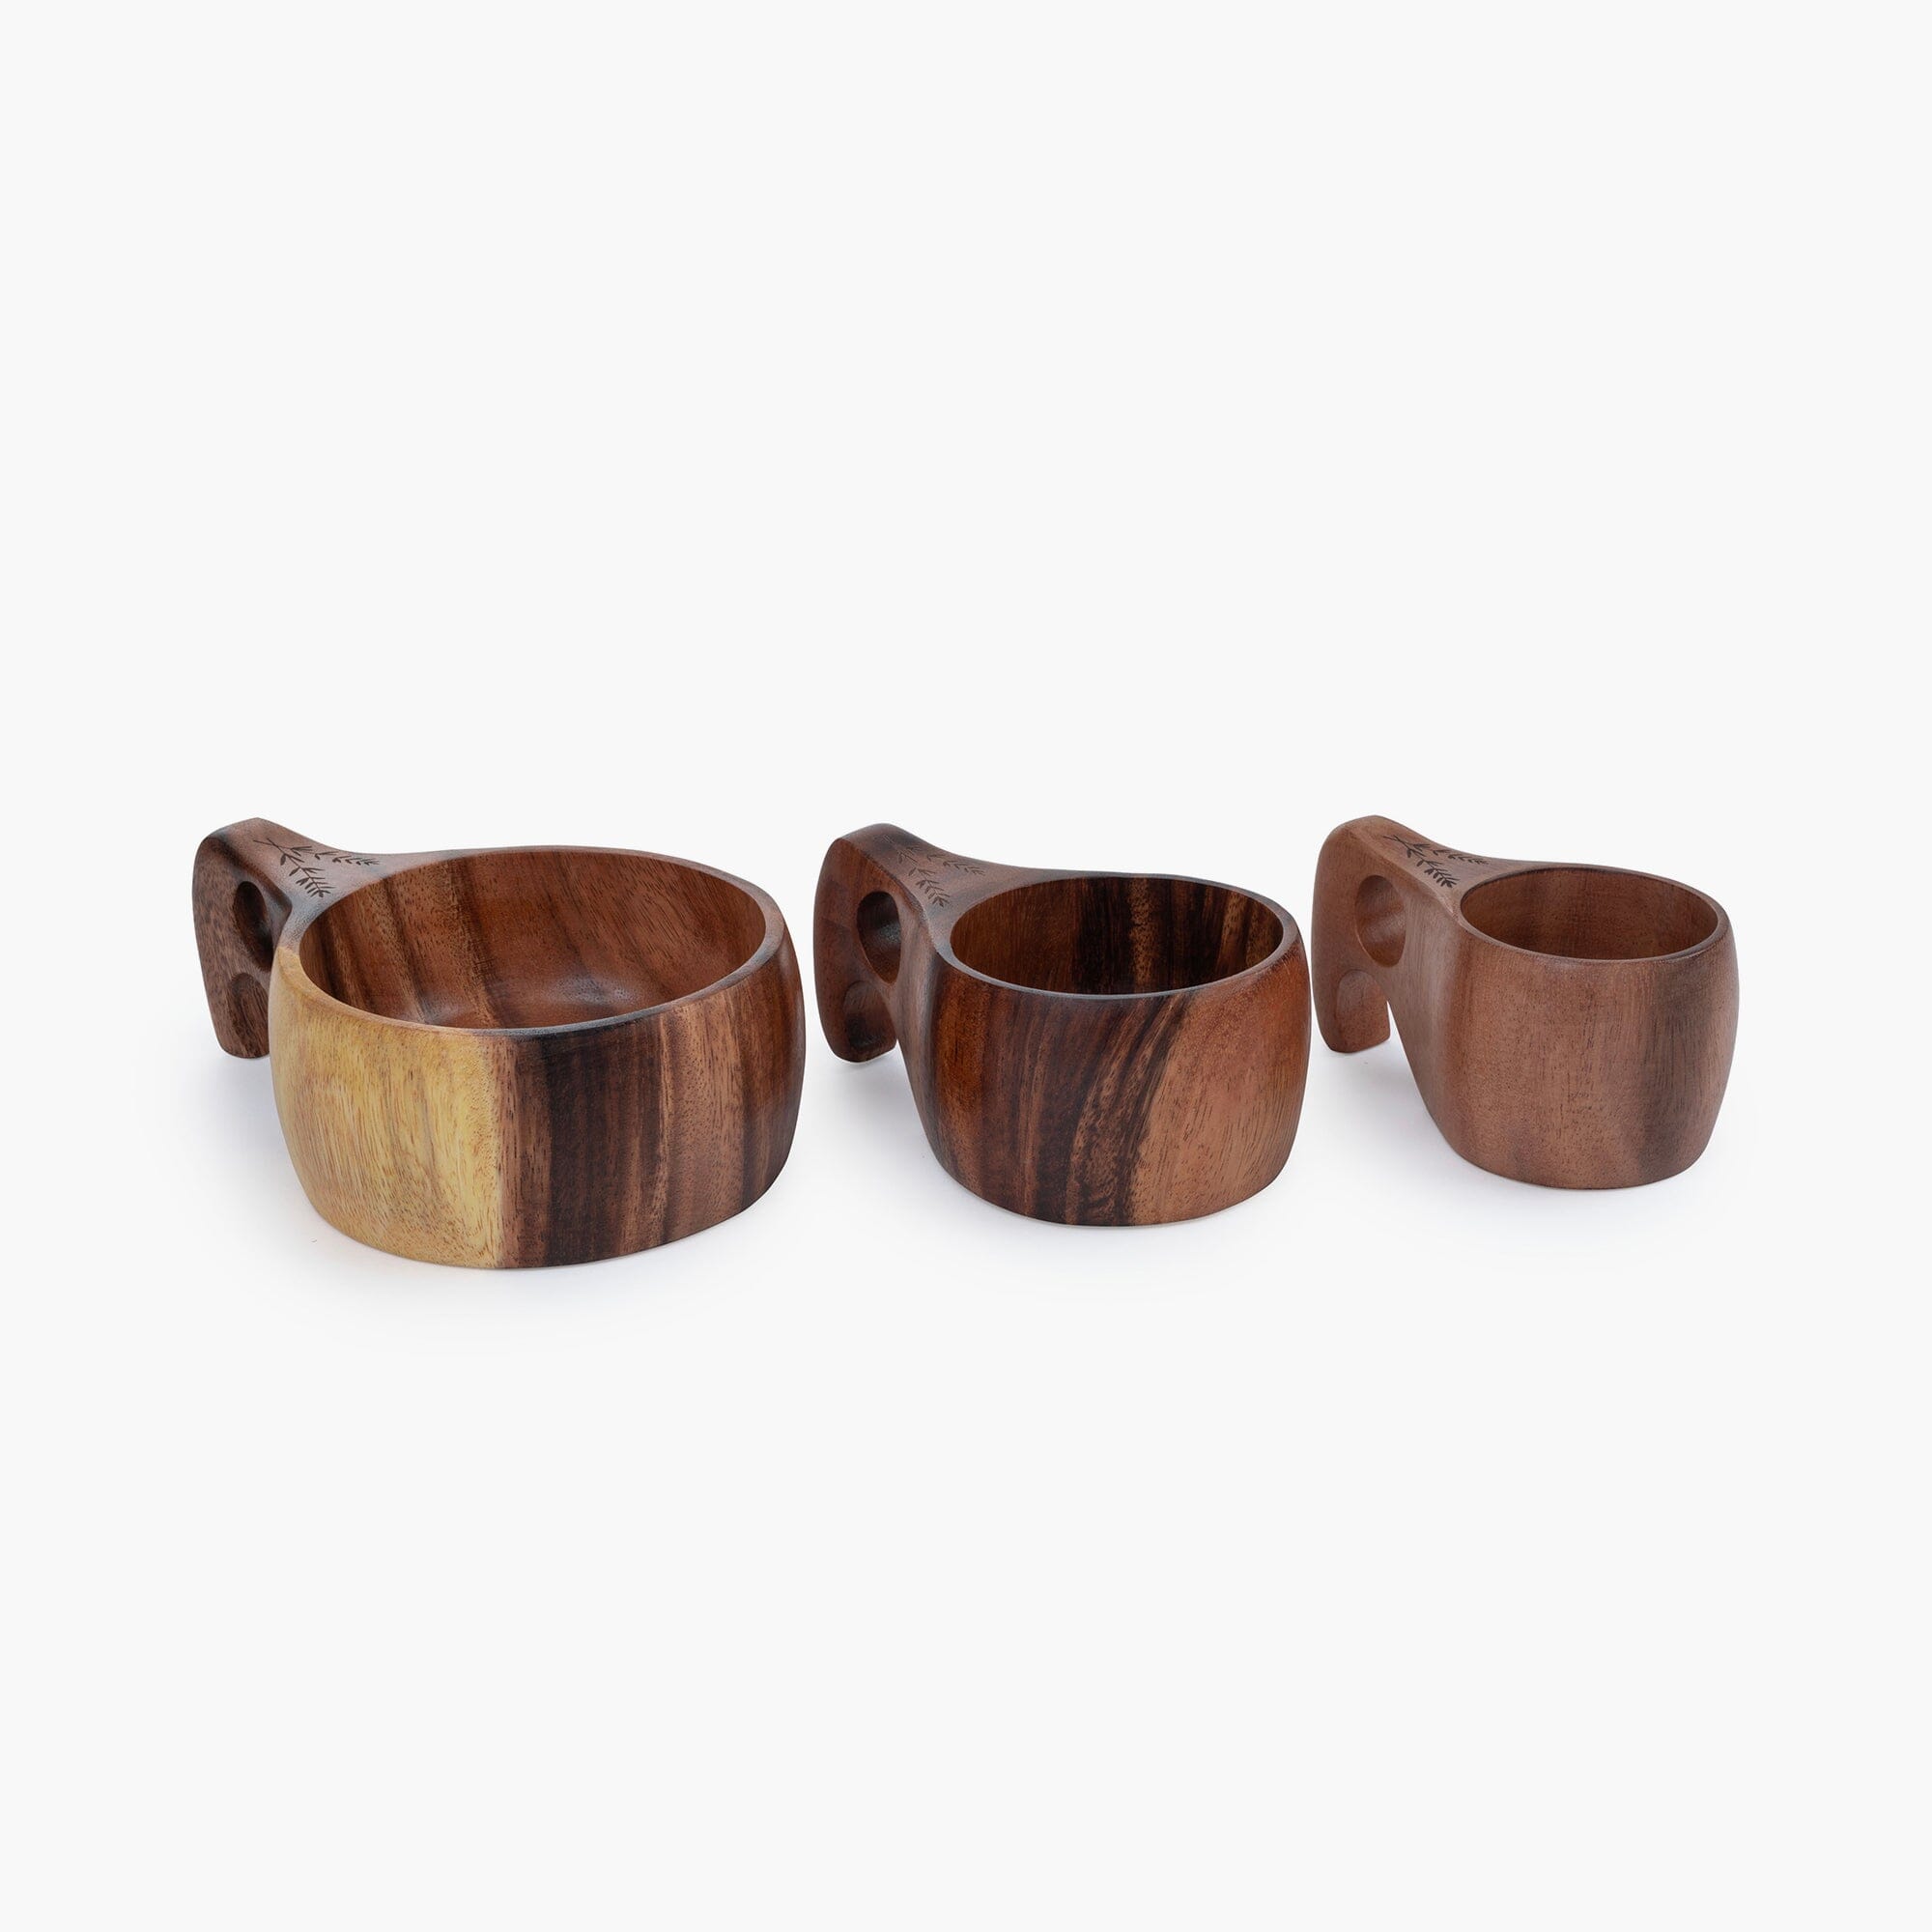 Kuksa Cups, Wooden Drinking Cup